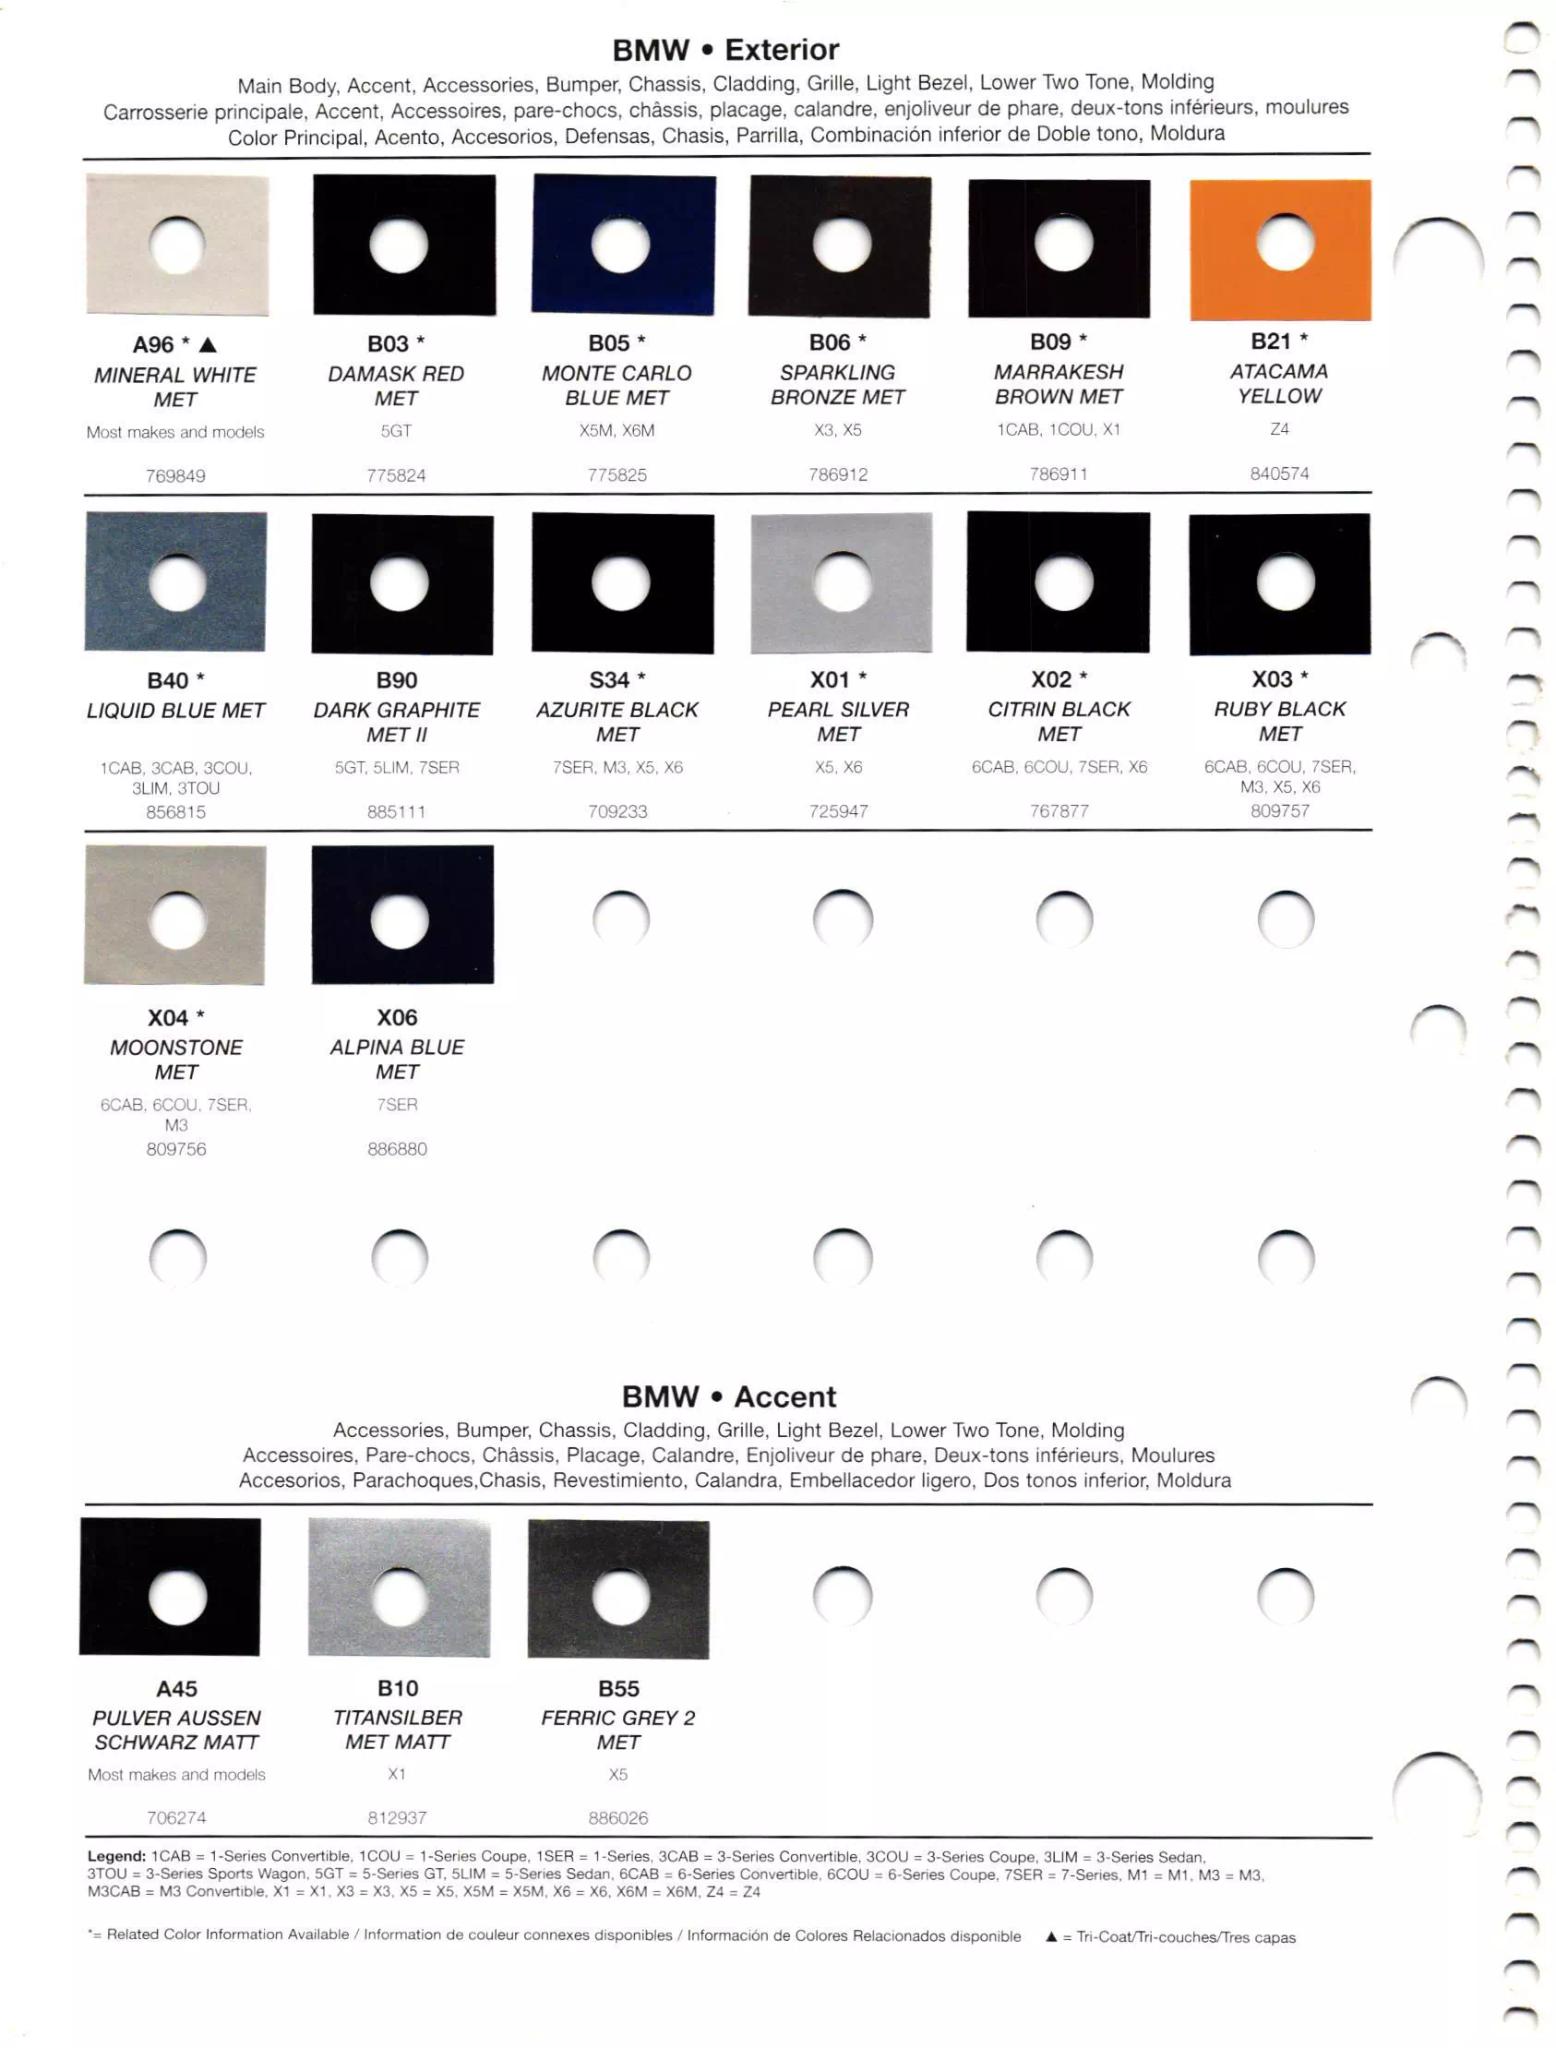 exterior main body paint codes for BMW Vehicles used in 2012.  Ordering codes, color shades, paint chips